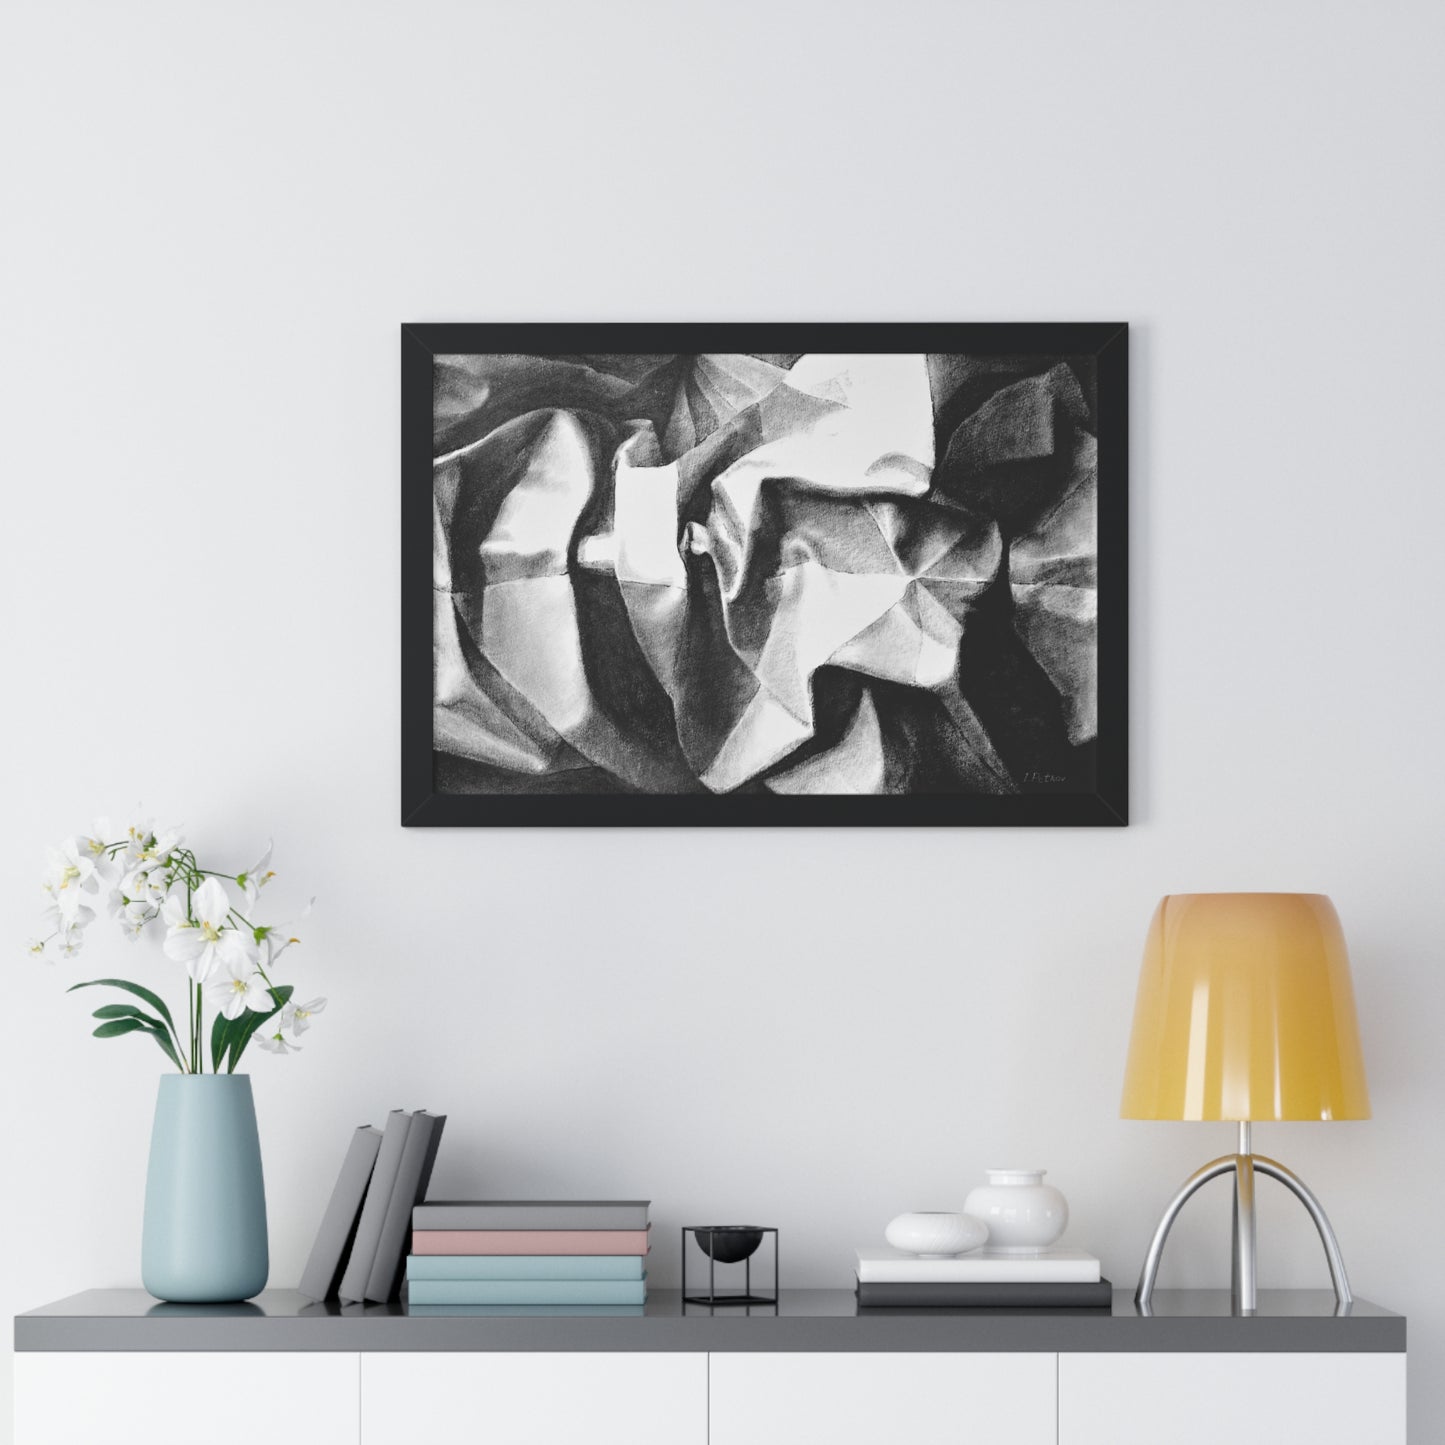 Folding Structure II -  Framed Satin Poster Print, Wall Art, Charcoal, Abstract Black and White Decor